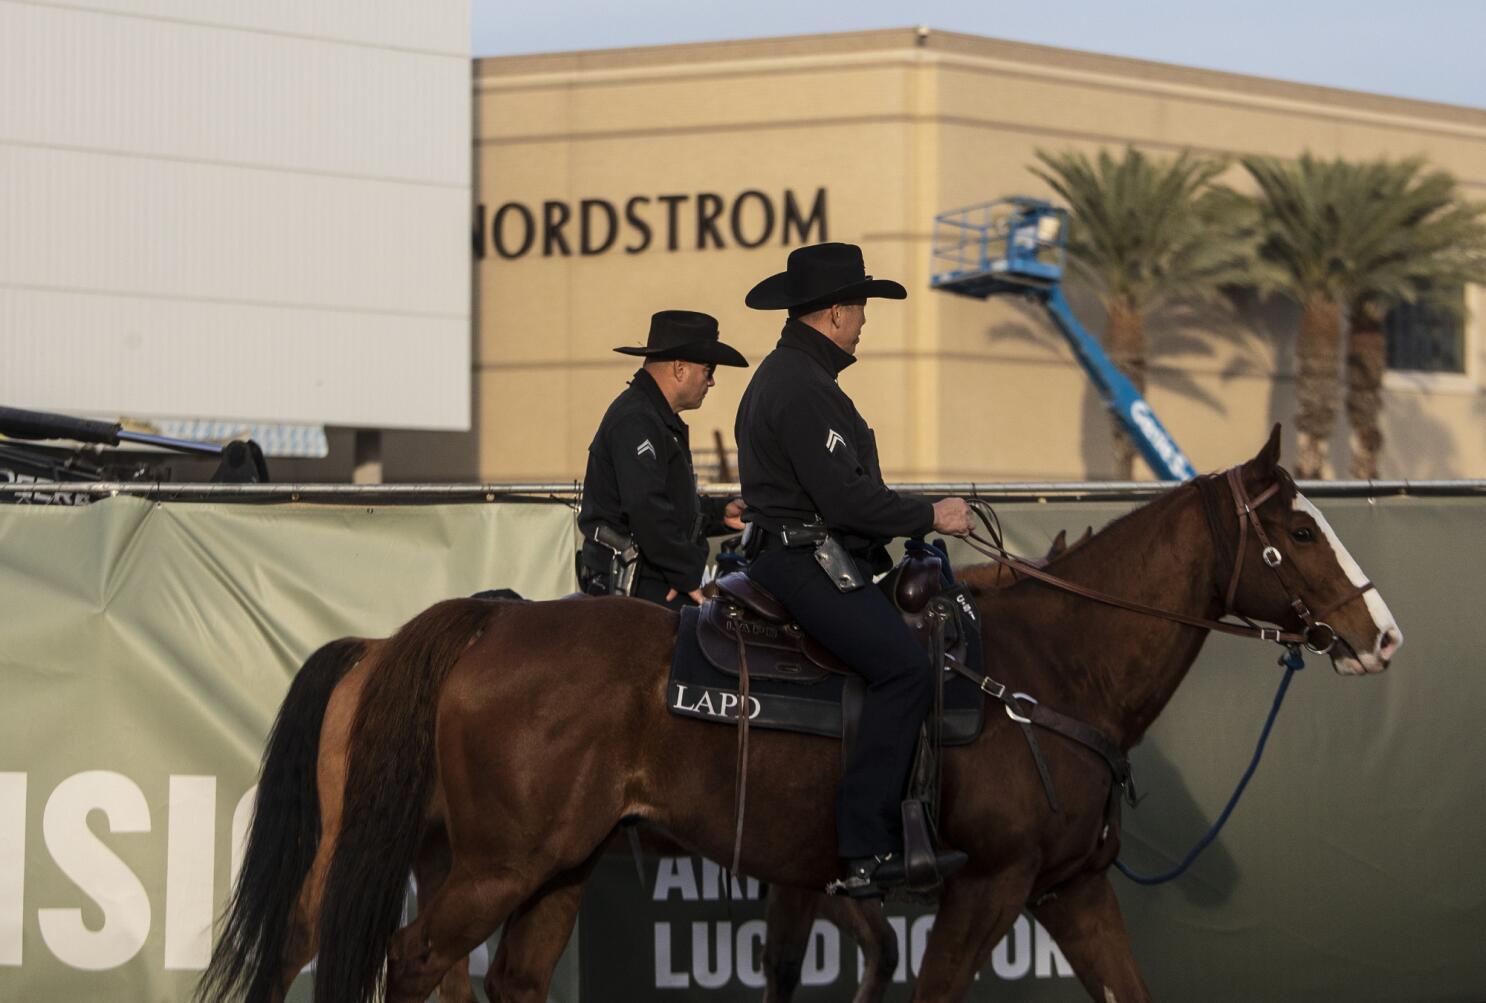 Nordstrom at Westfield Topanga mall hit in latest rash of flash mob  robberies – Daily News